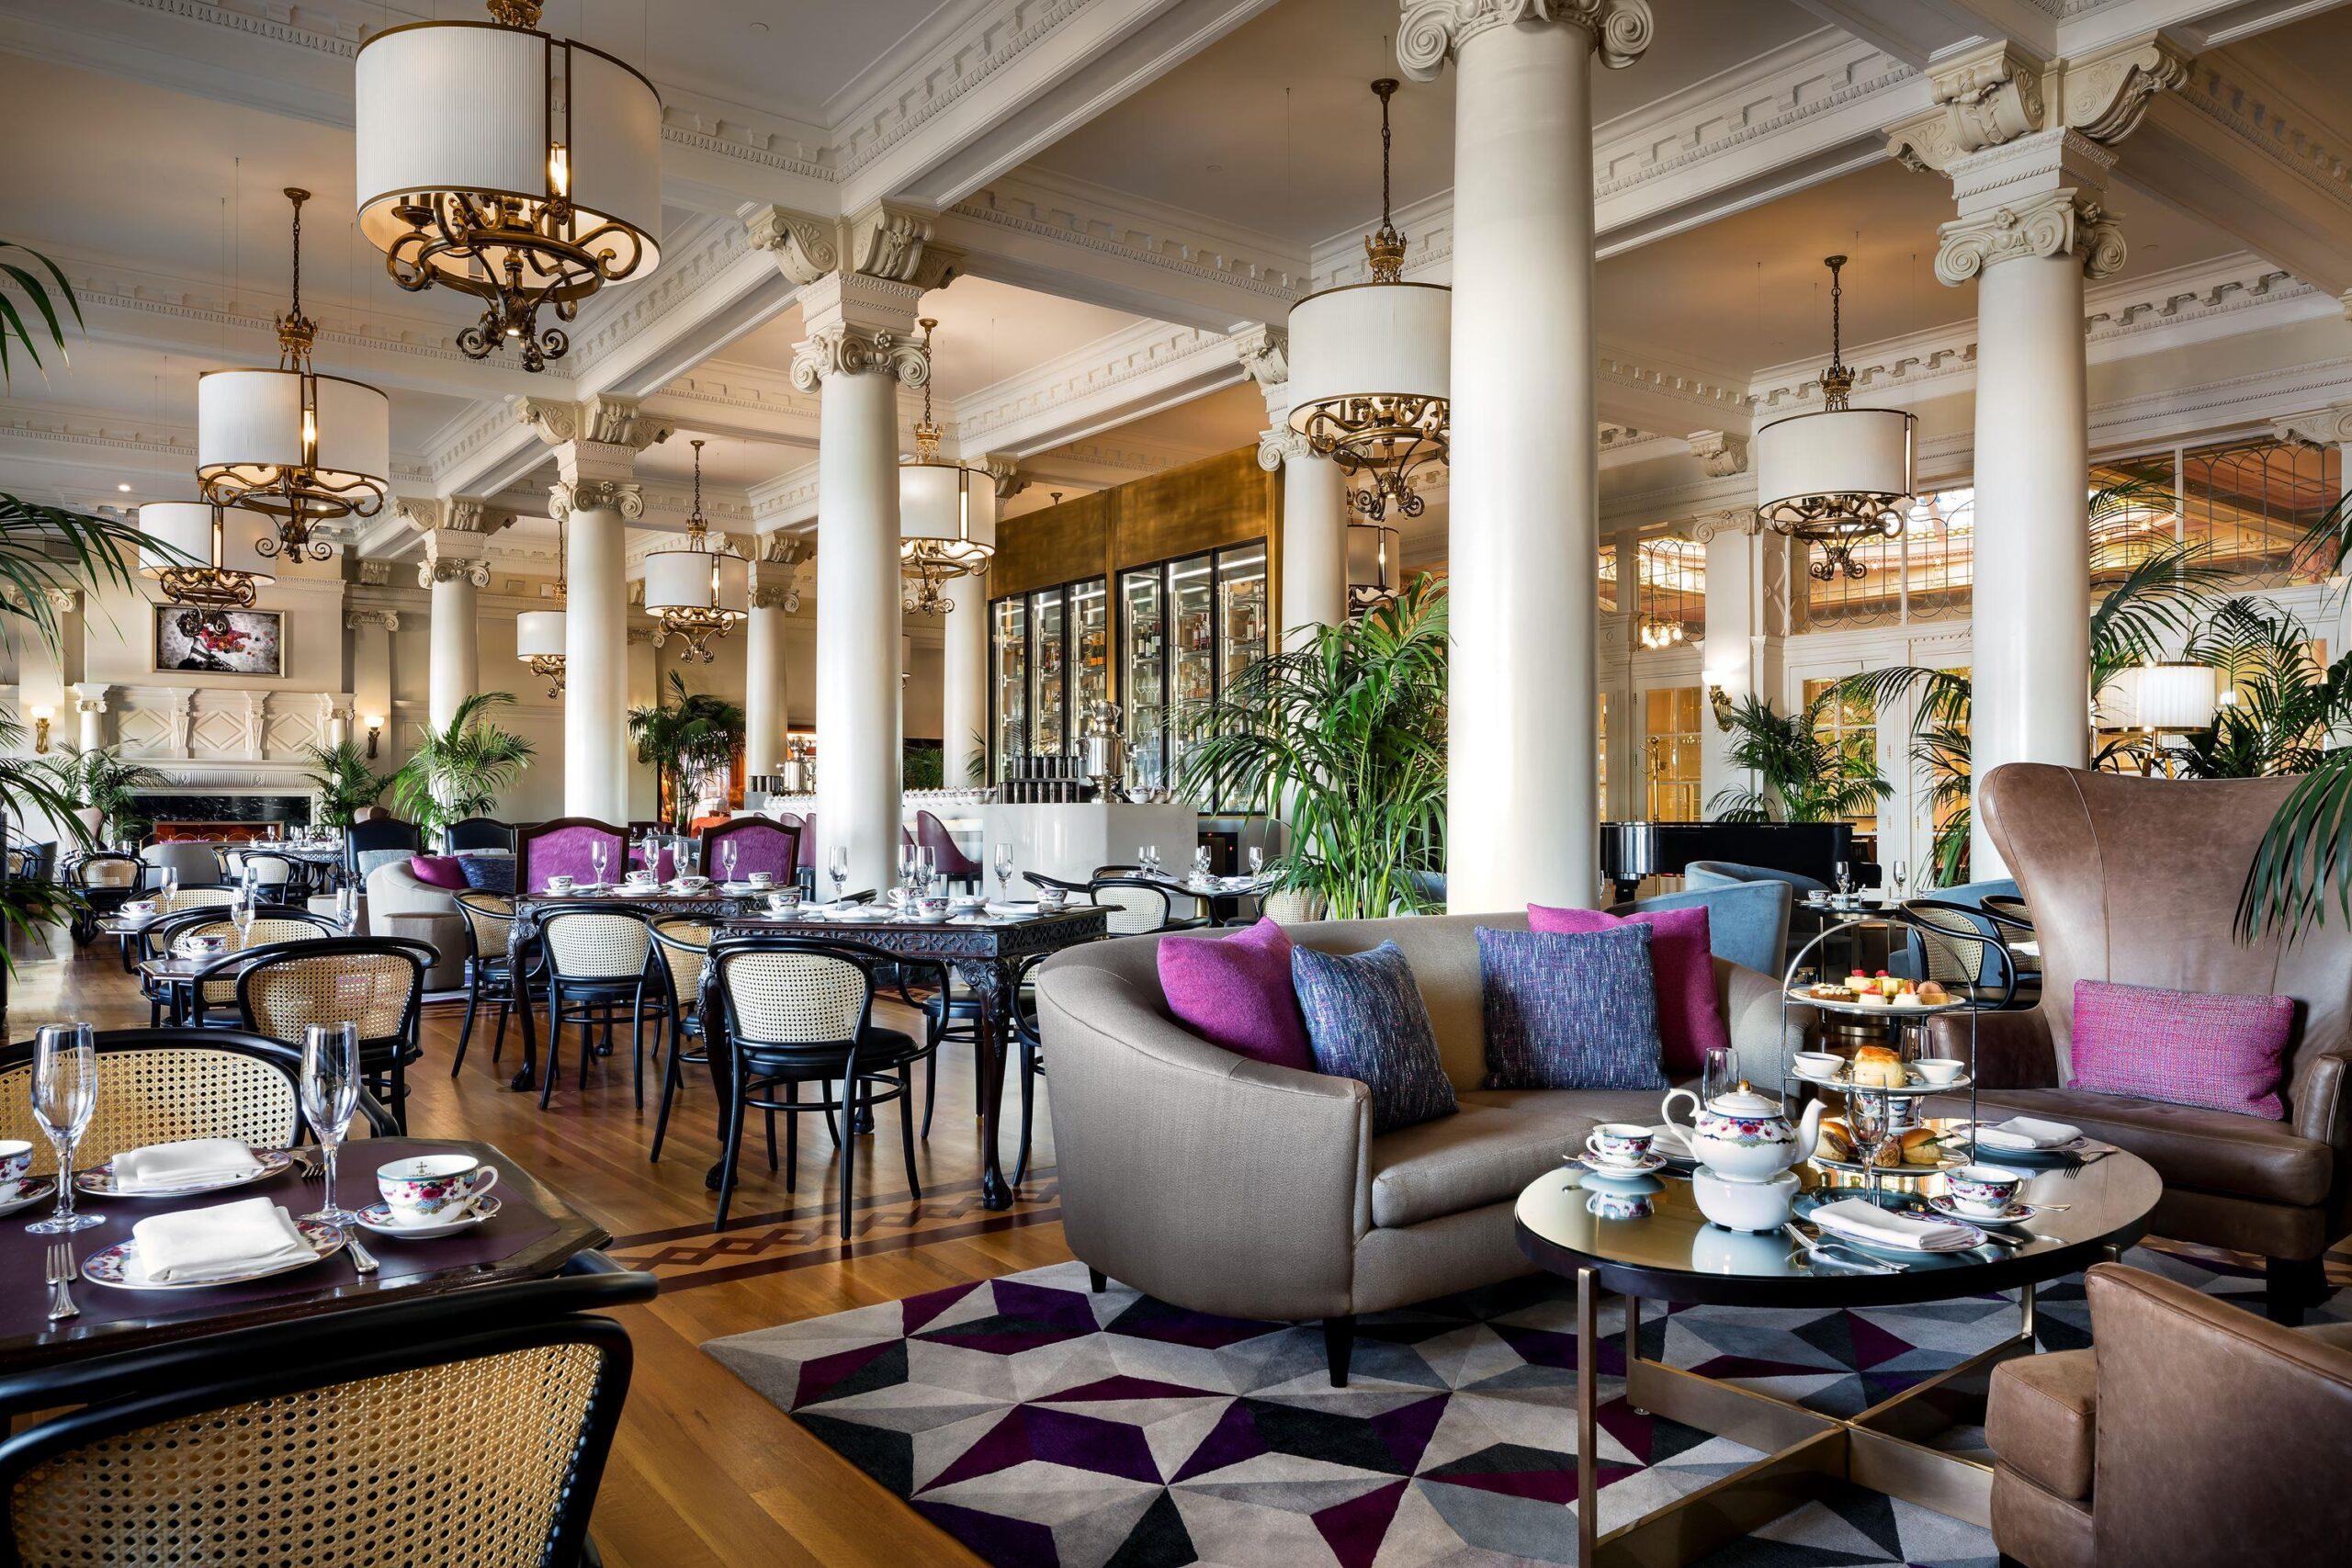 http://www.clippervacations.com/magazine/wp-content/uploads/sites/10/2017/04/Lobby_Lounge-High-Tea-scaled.jpg